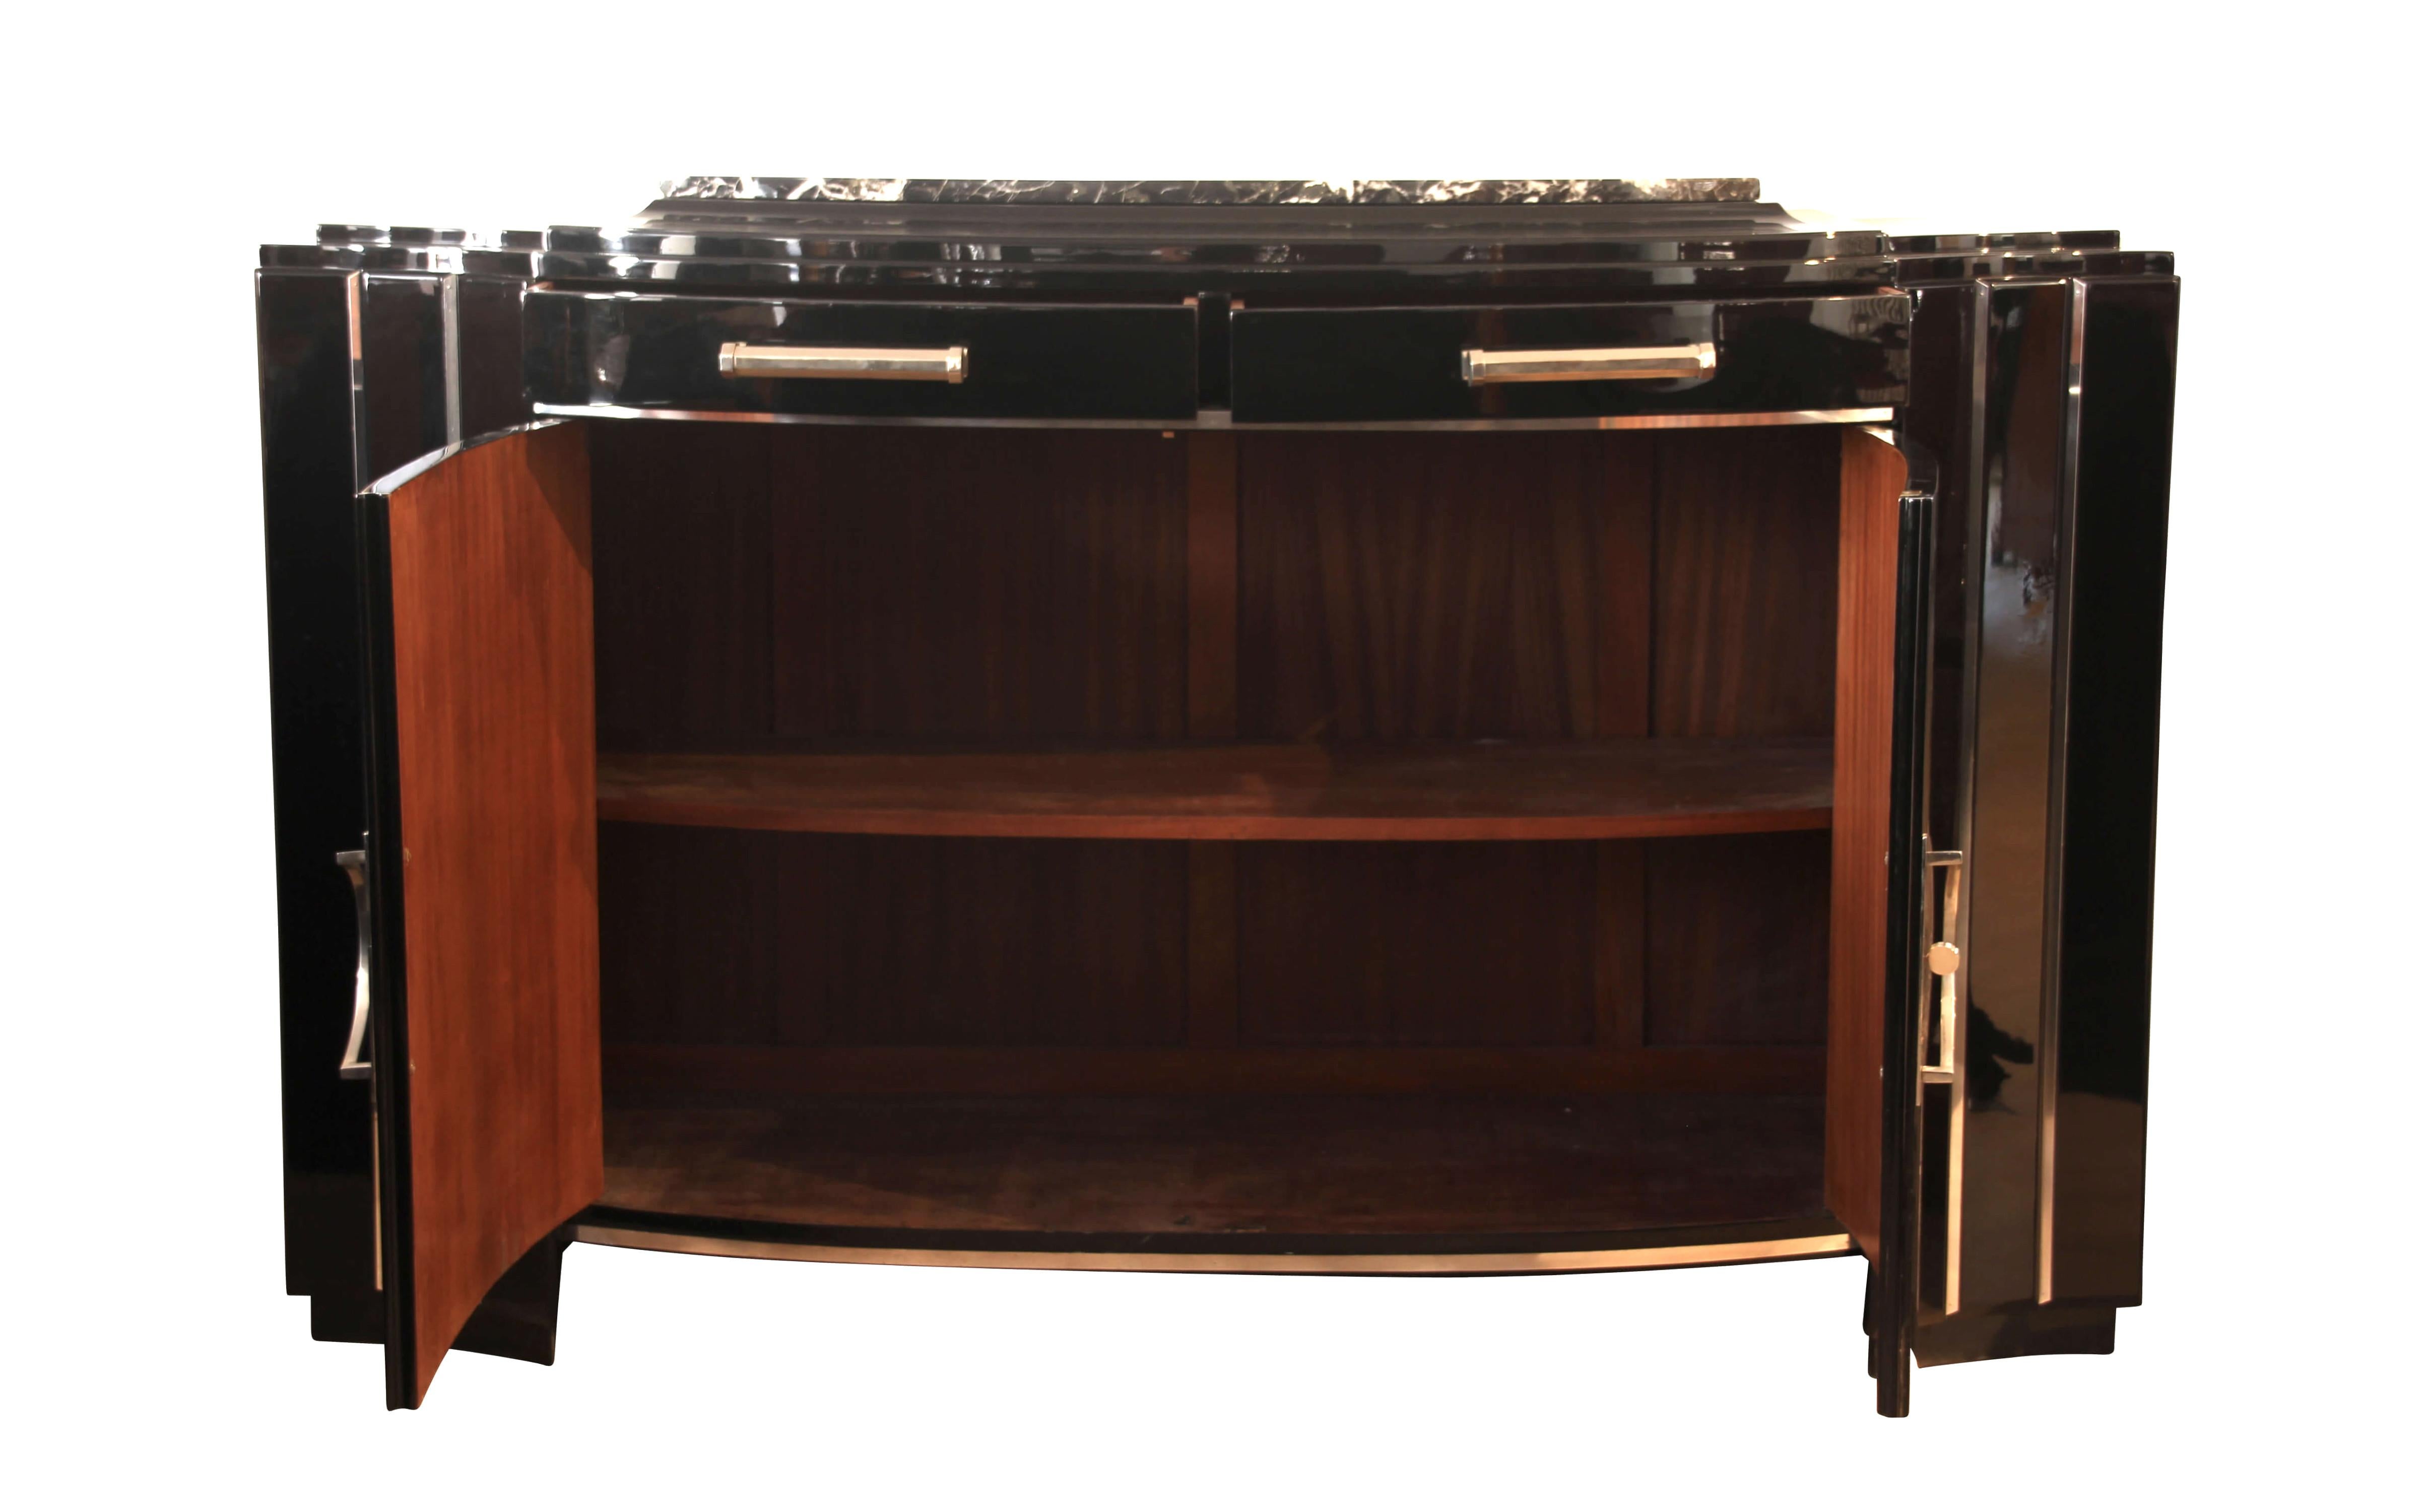 Art Deco Sideboard, Curved Front, Black, Mahogany and Chrome, France, circa 1930 (Art déco)